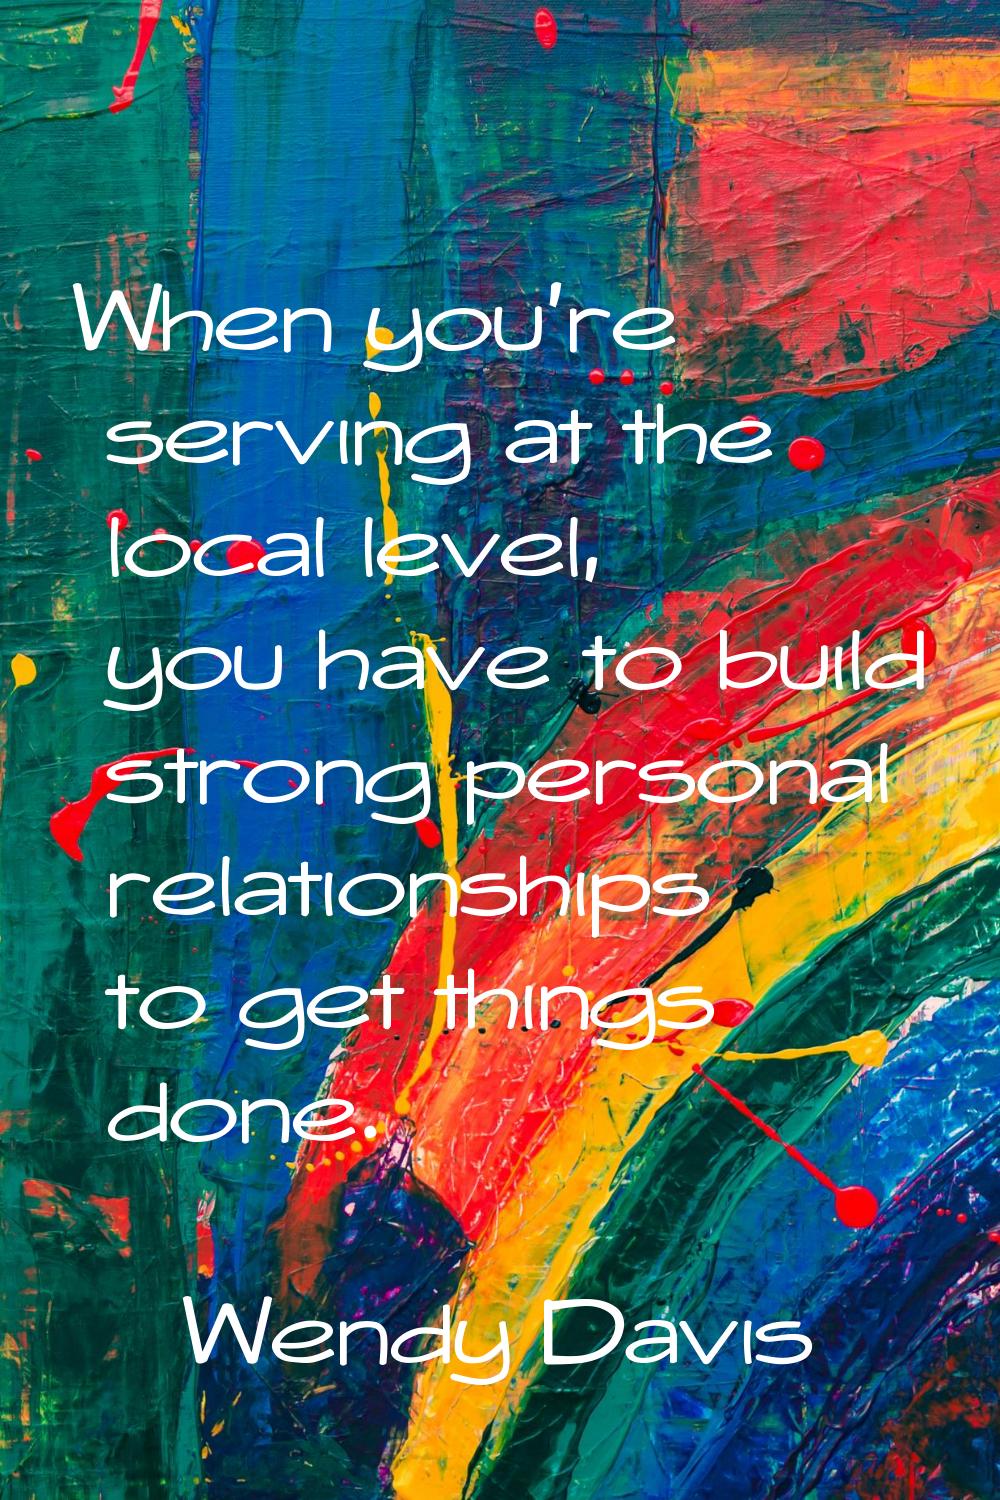 When you're serving at the local level, you have to build strong personal relationships to get thin